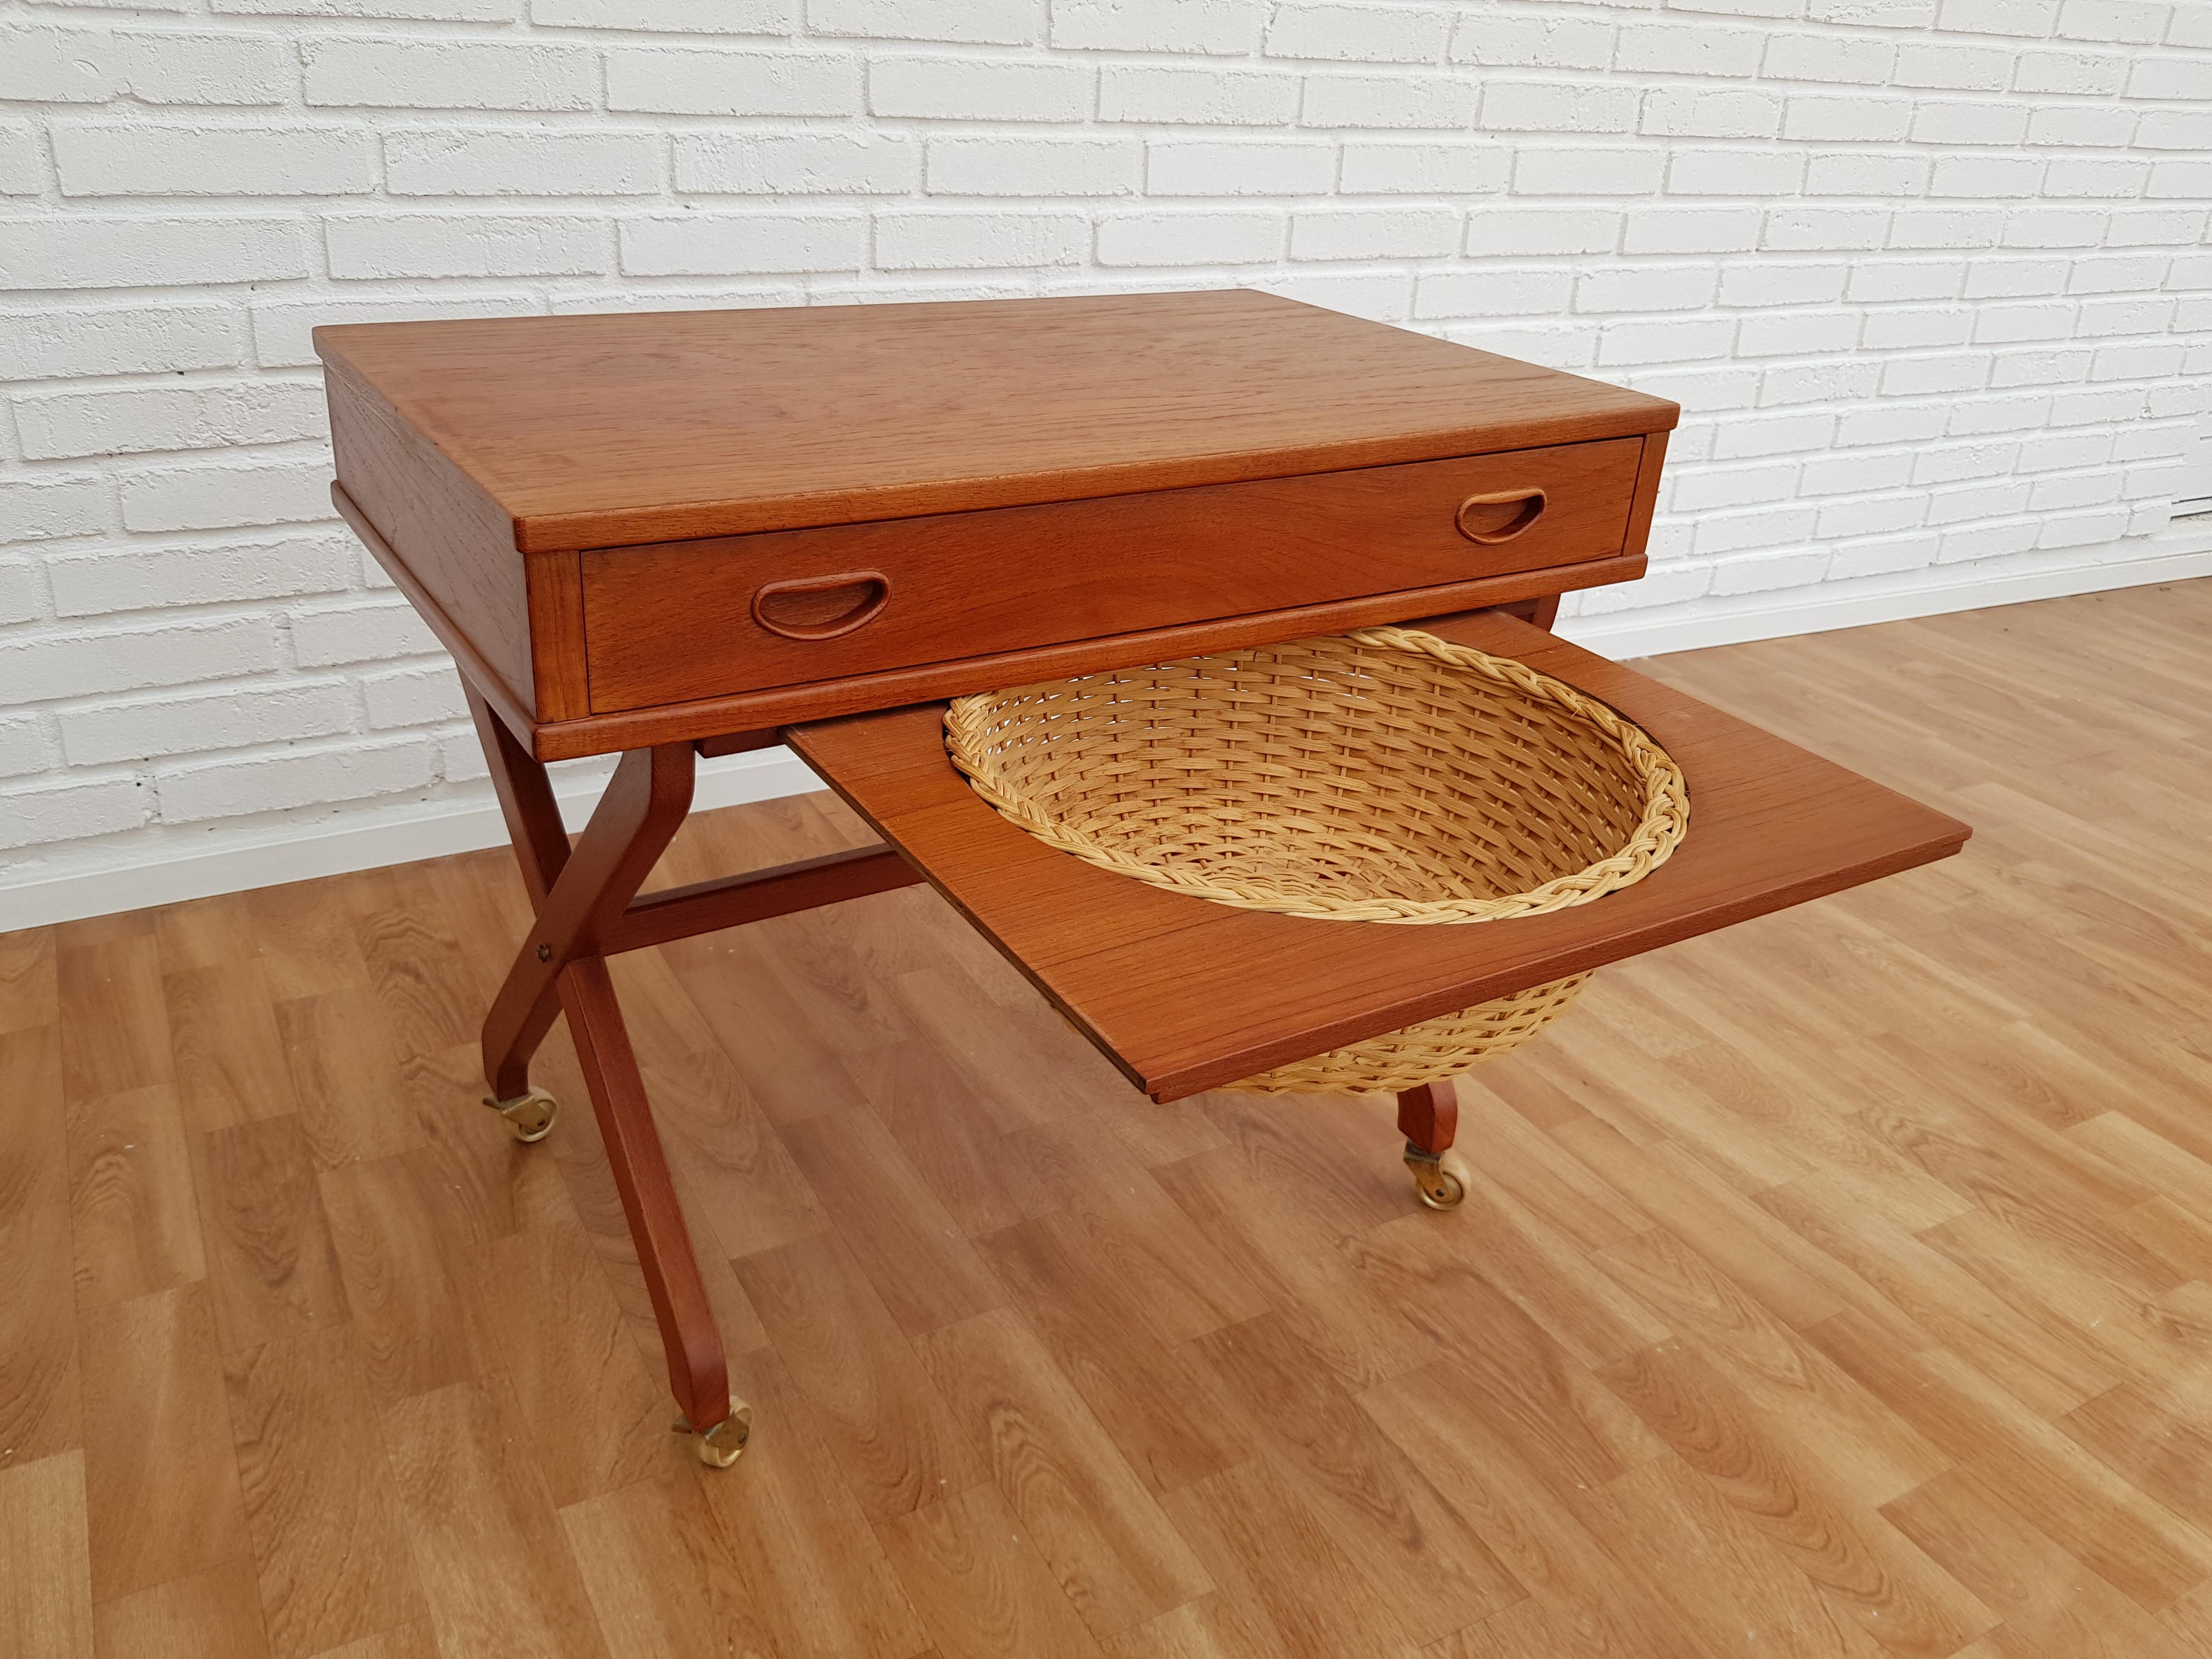 Vintage Danish Sewing Table, 1960s, Teak Wood, Rattan In Good Condition For Sale In Tarm, DK